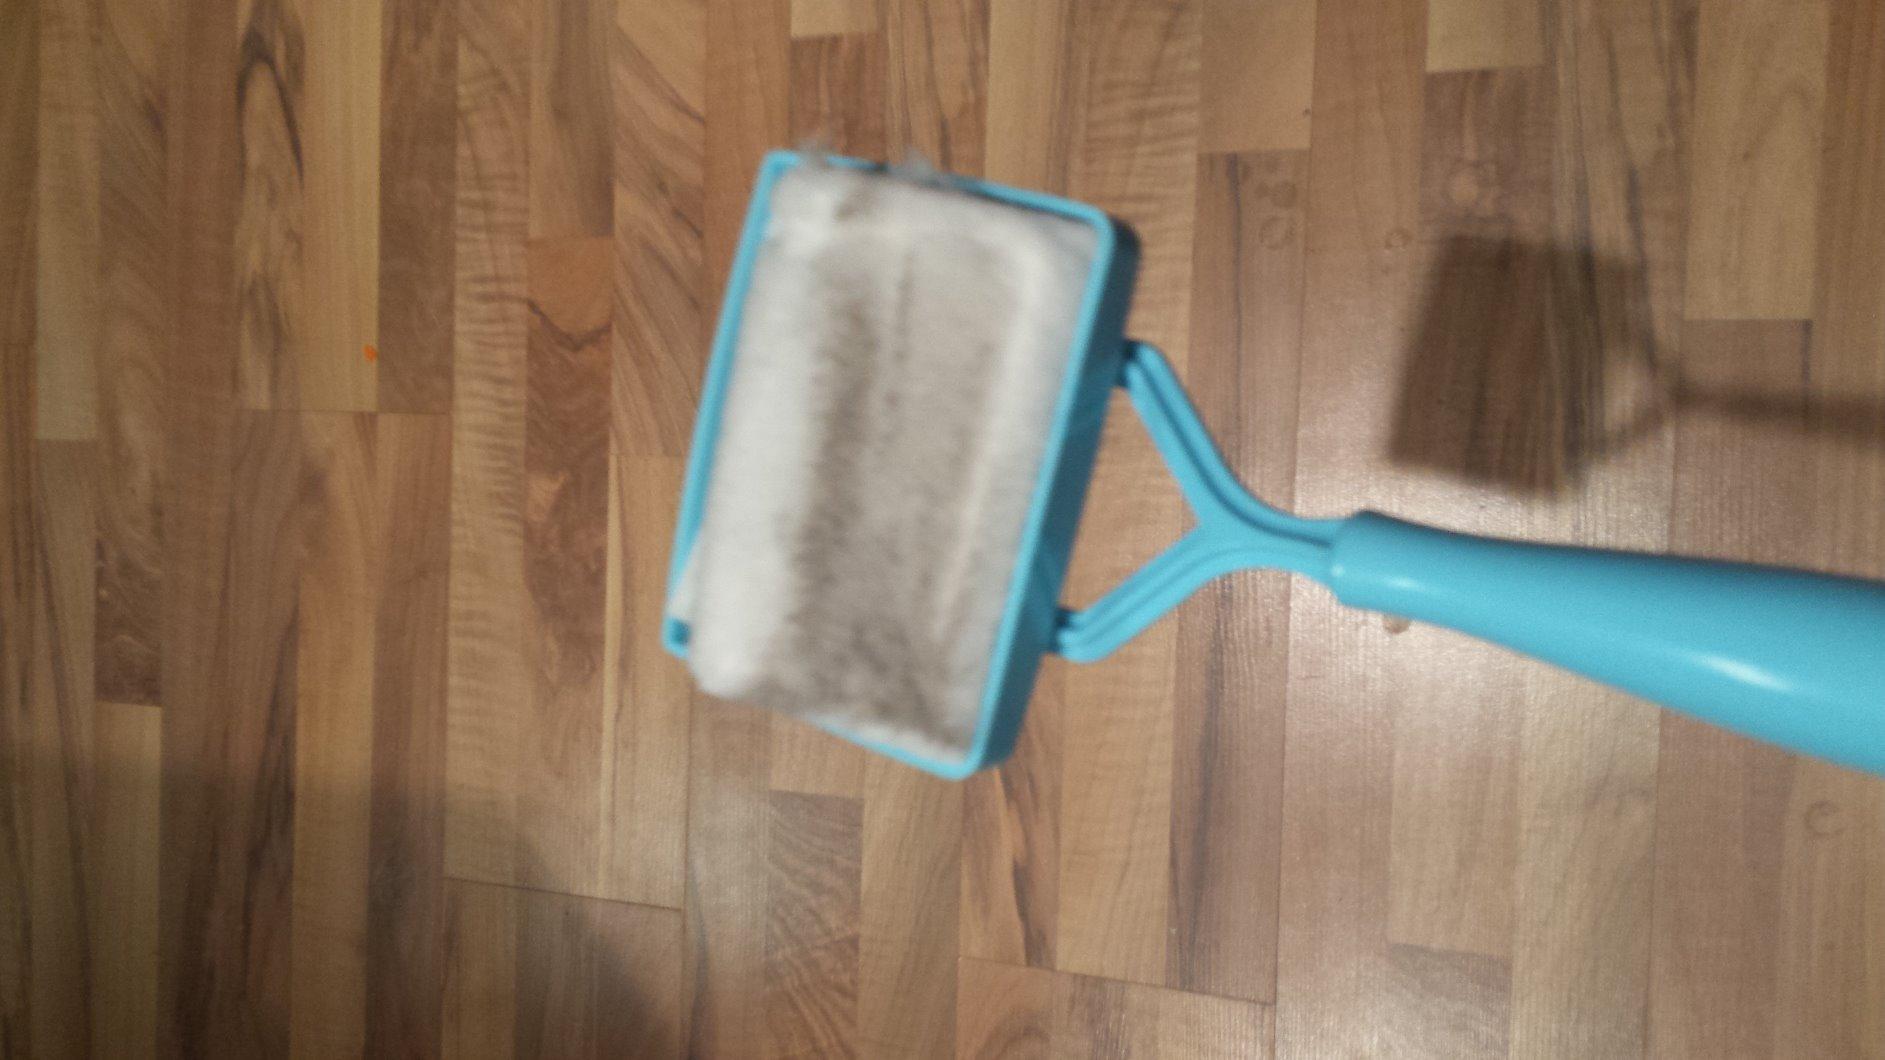 Microfiber Baseboard And Molding Cleaning Mop photo review